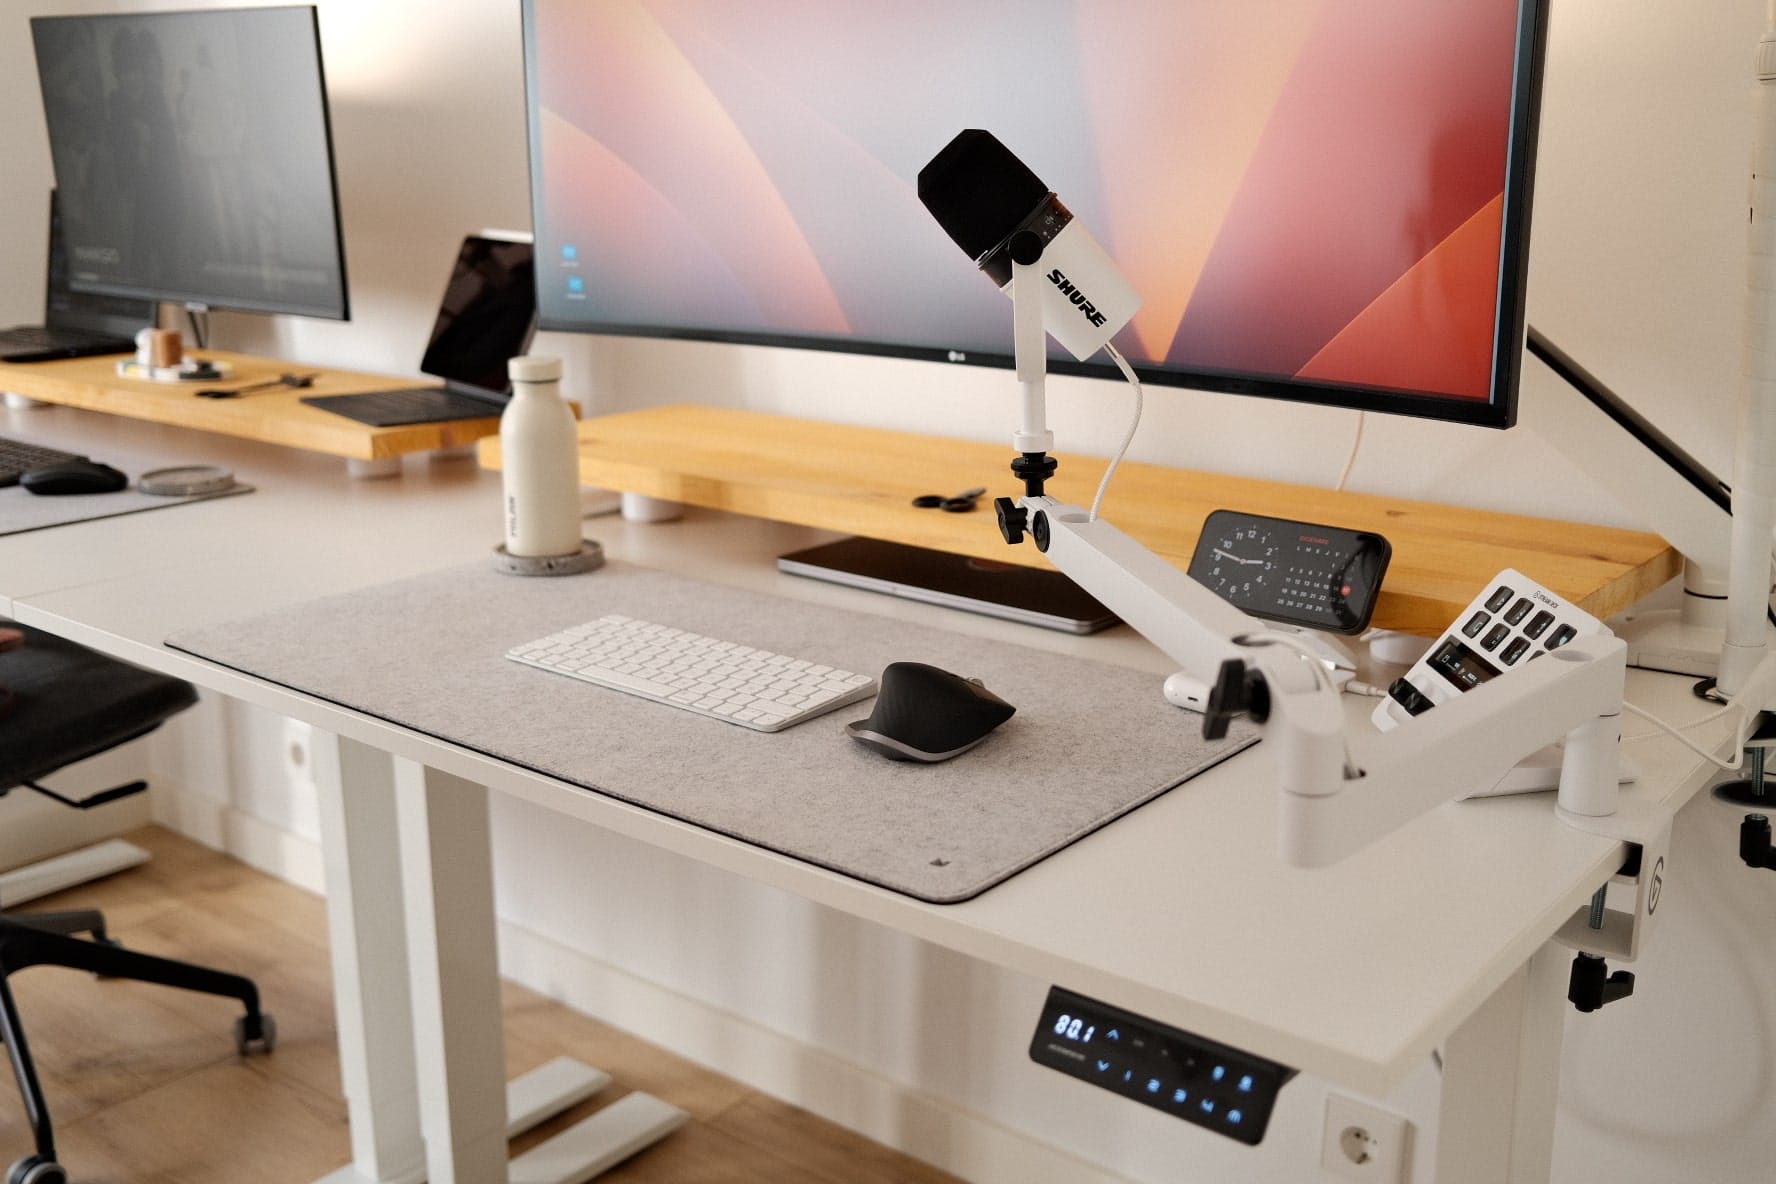 An organised desk space with a dual monitor setup, microphone on a white boom arm, white keyboard, ergonomic mouse on a felt desk mat, and a streaming control deck